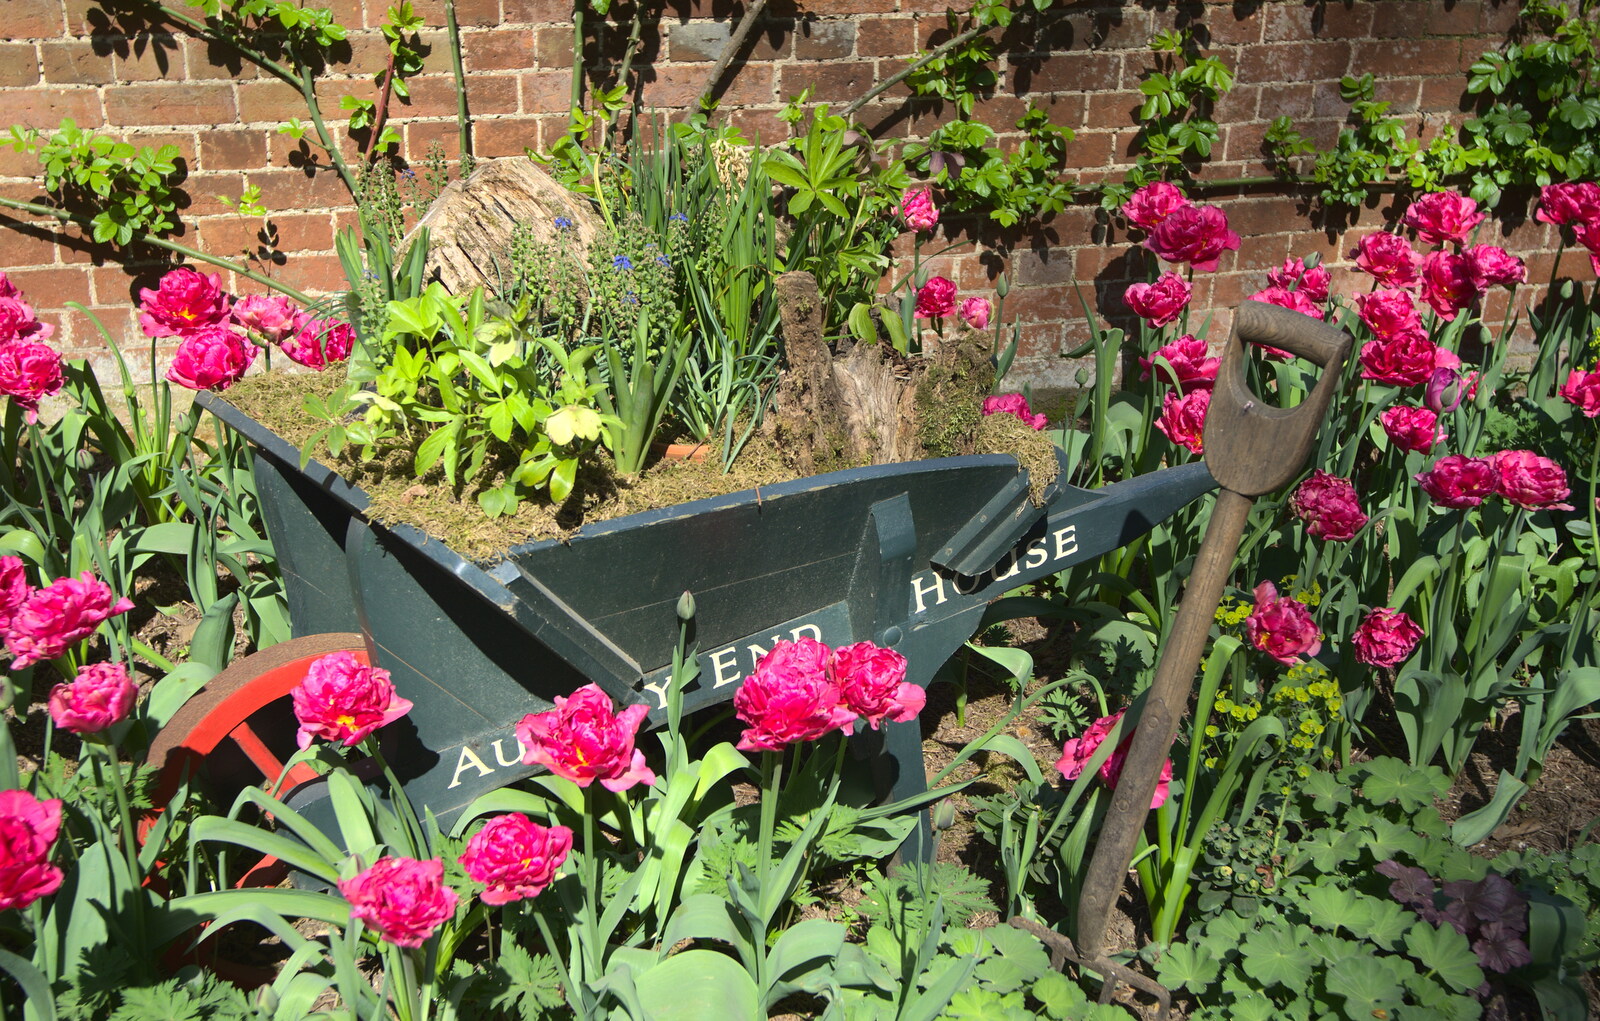 A wheelbarrow is overgrown with flowers from A Trip to Audley End House, Saffron Walden, Essex - 16th April 2014